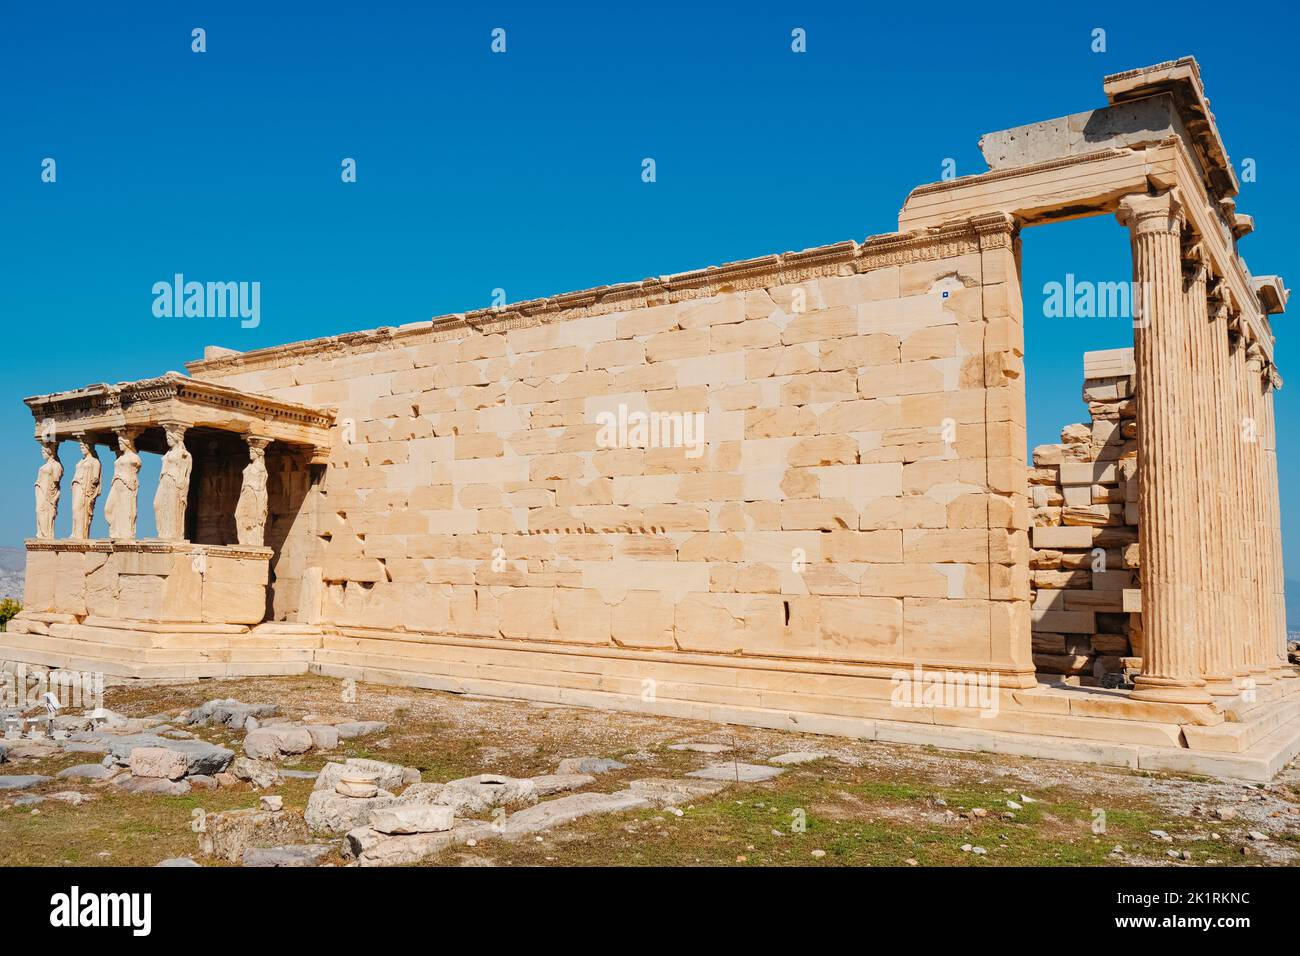 the Erechtheion or Temple of Athena Polias, in the Acropolis of Athens, Greece, and its famous Porch of the Maidens Stock Photo